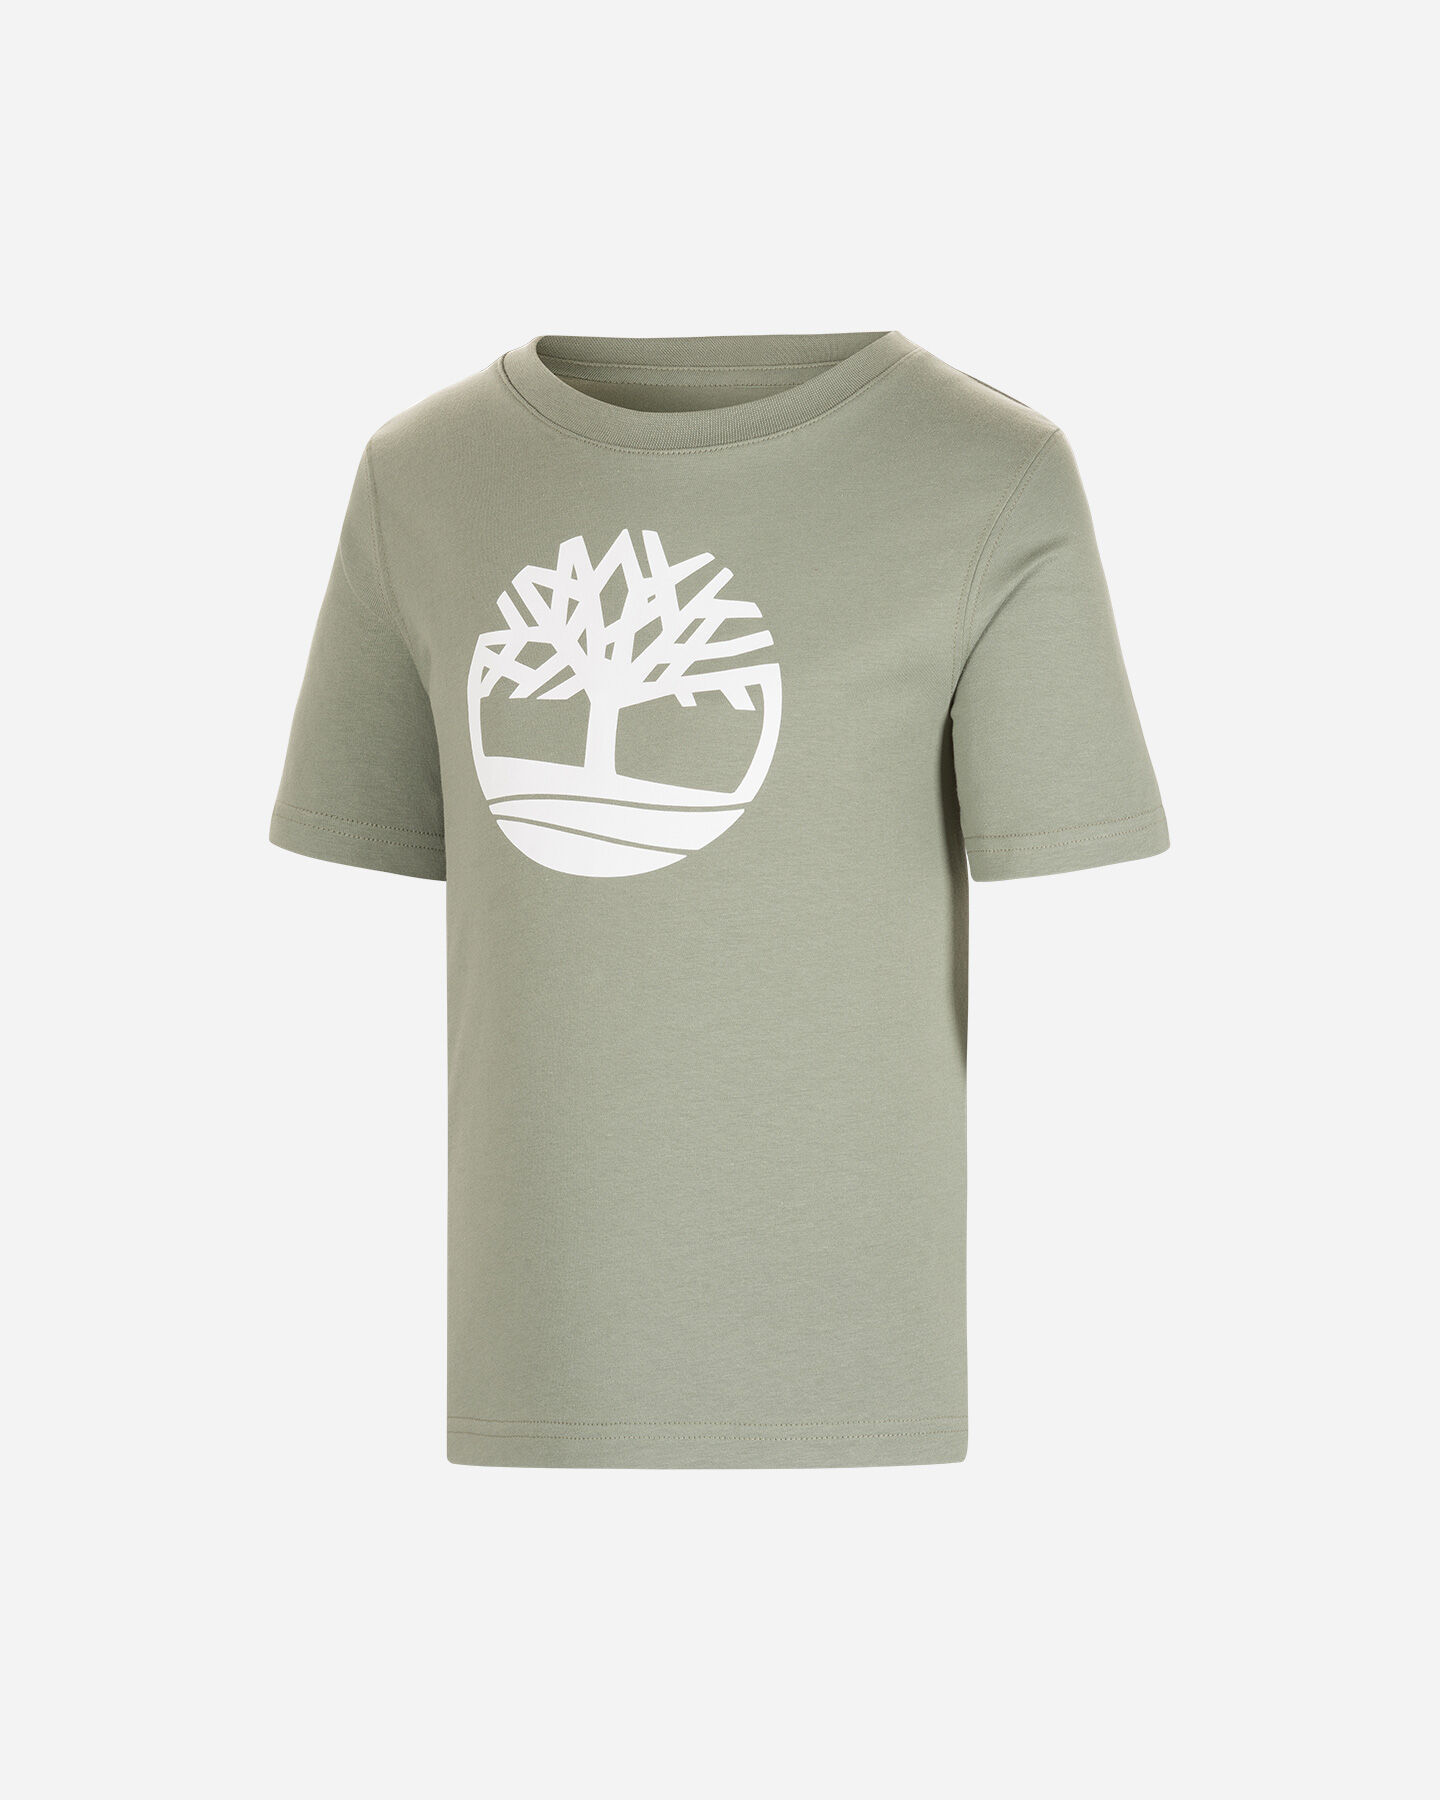  T-Shirt TIMBERLAND PLOGO TREE JR S4088881|708|6A scatto 0